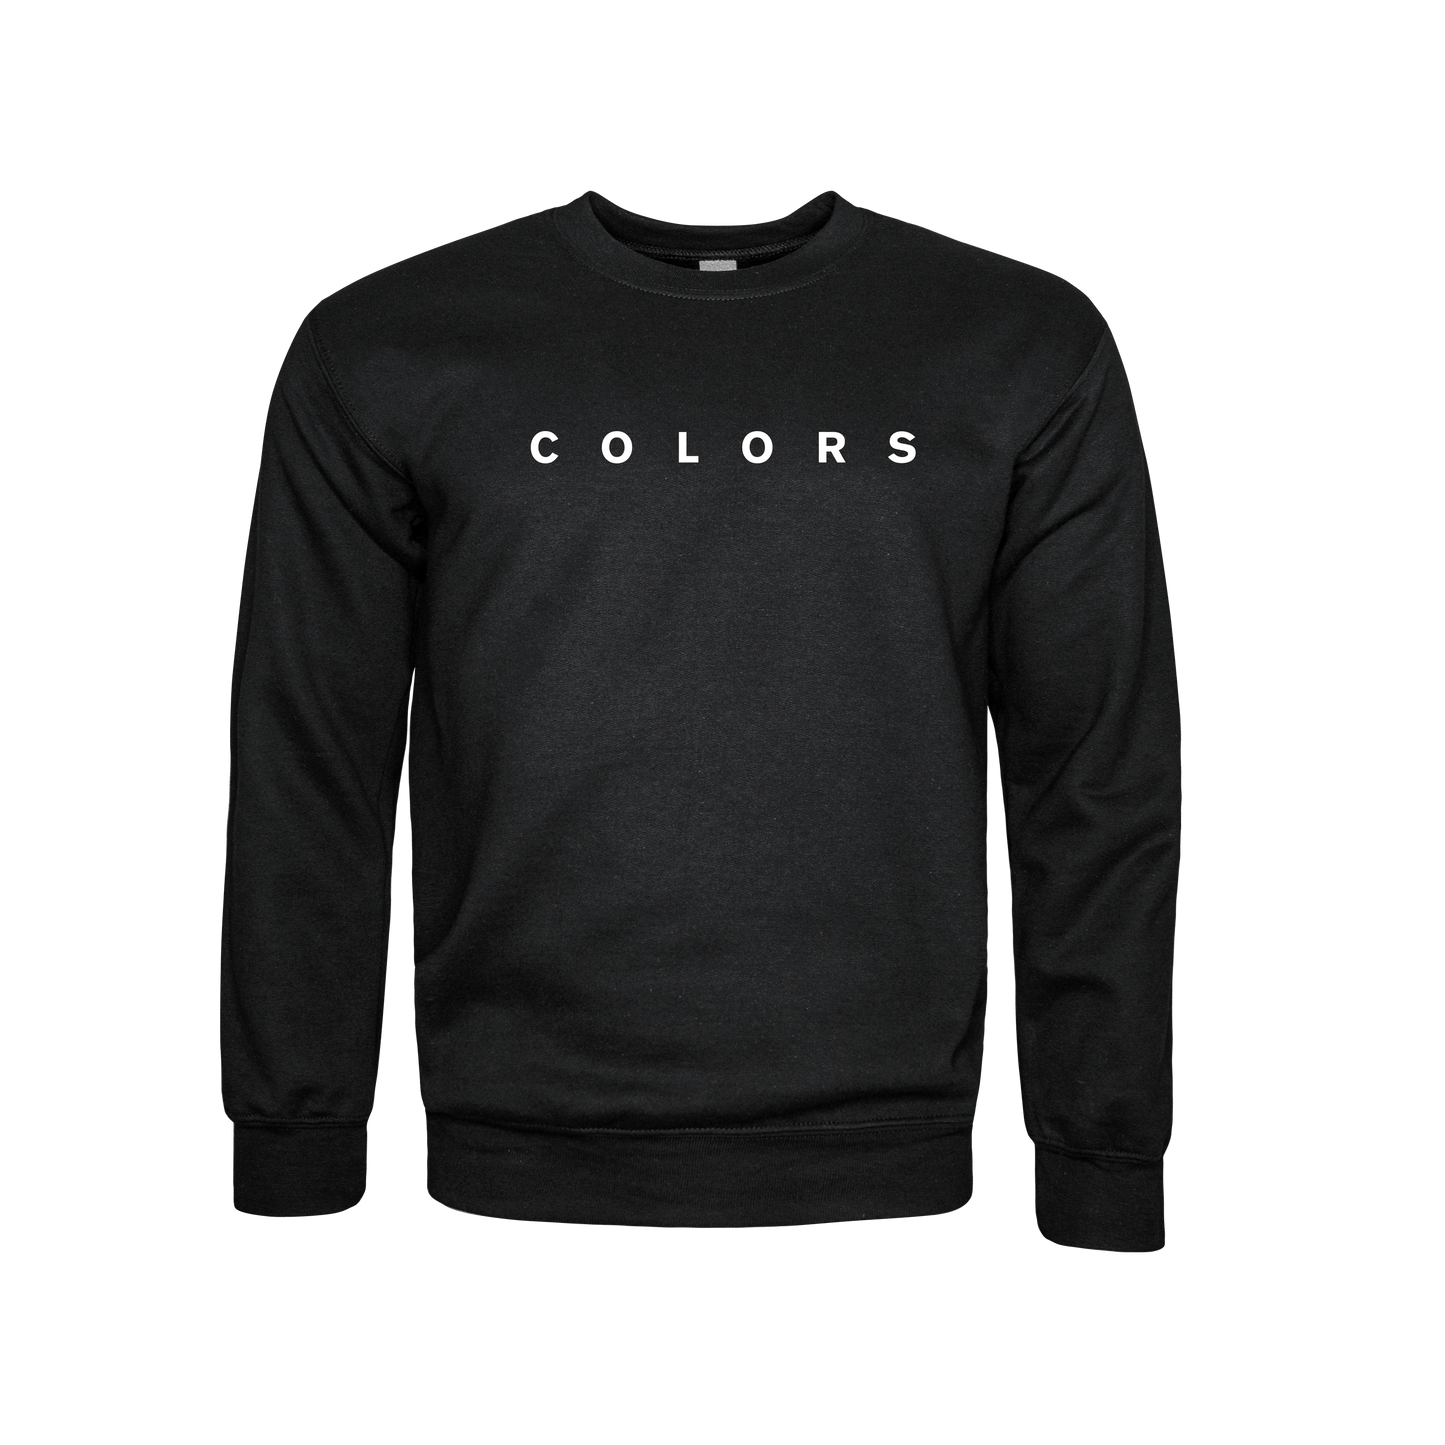 "Colors" Sweater